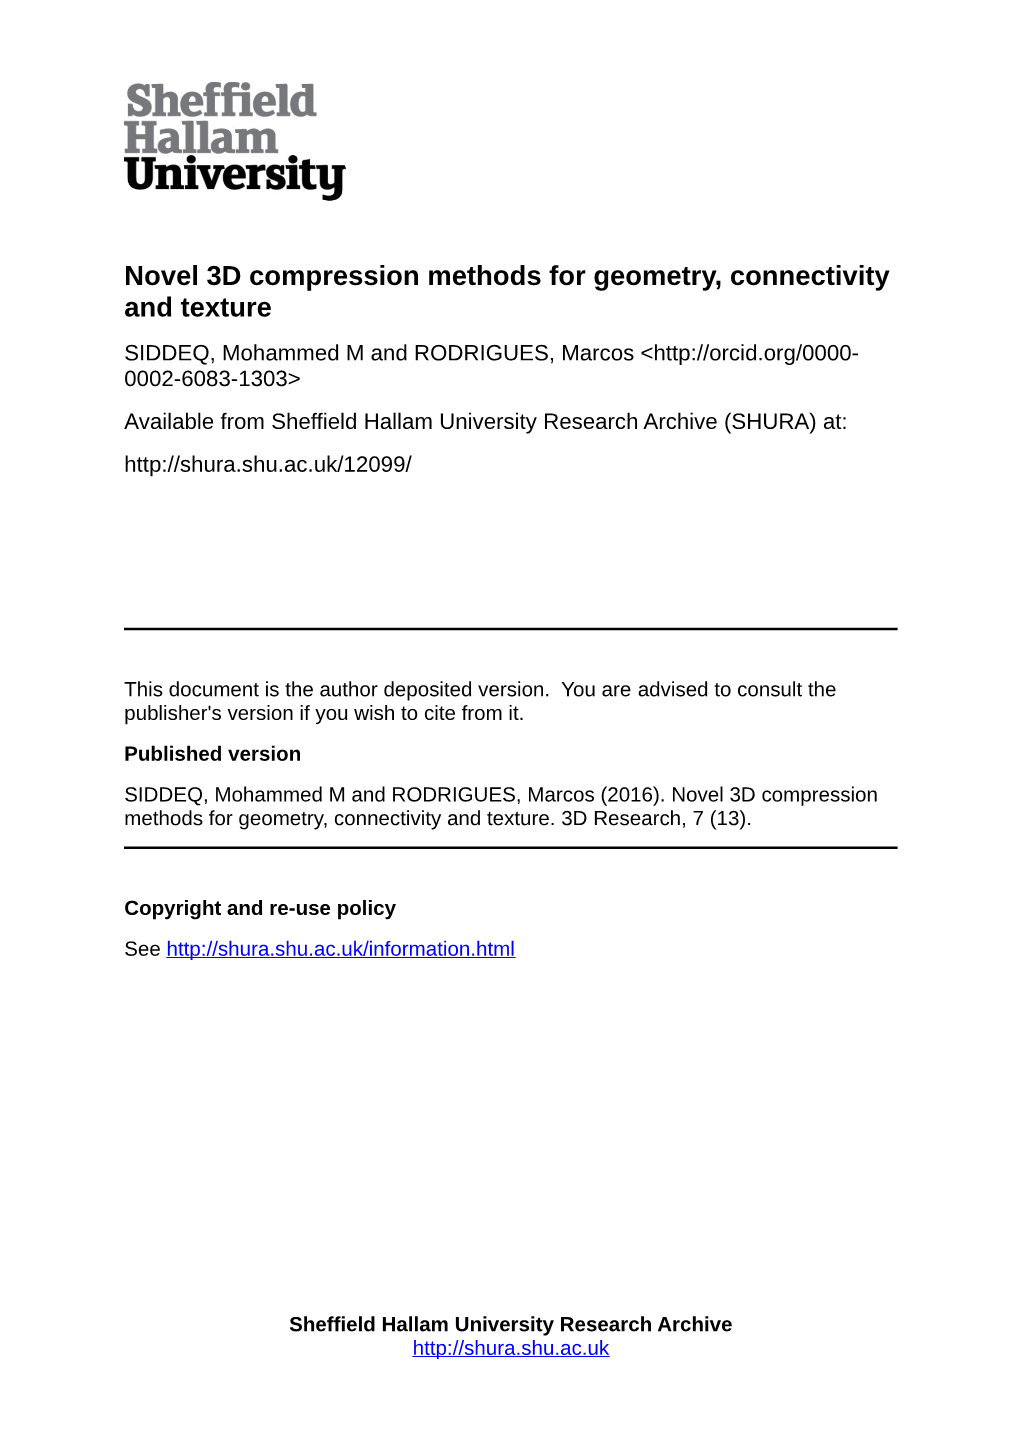 Novel 3D Compression Methods for Geometry, Connectivity and Texture